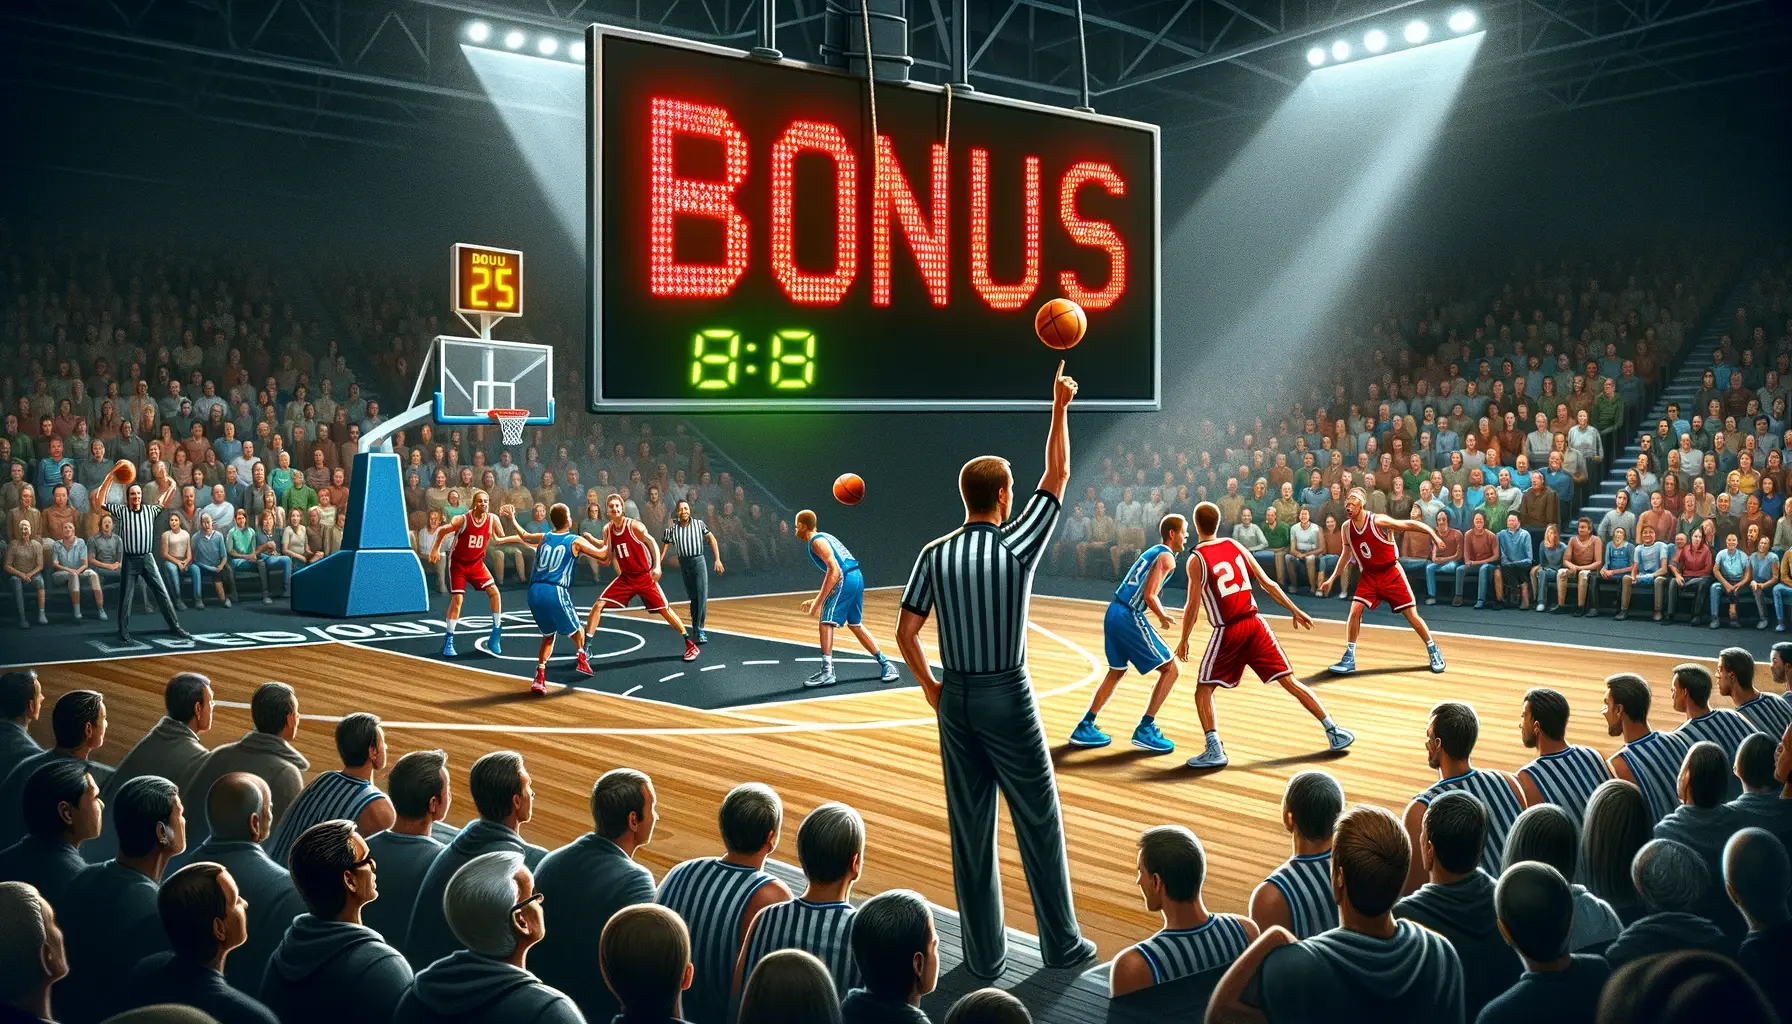 What Does Bonus Mean in Basketball